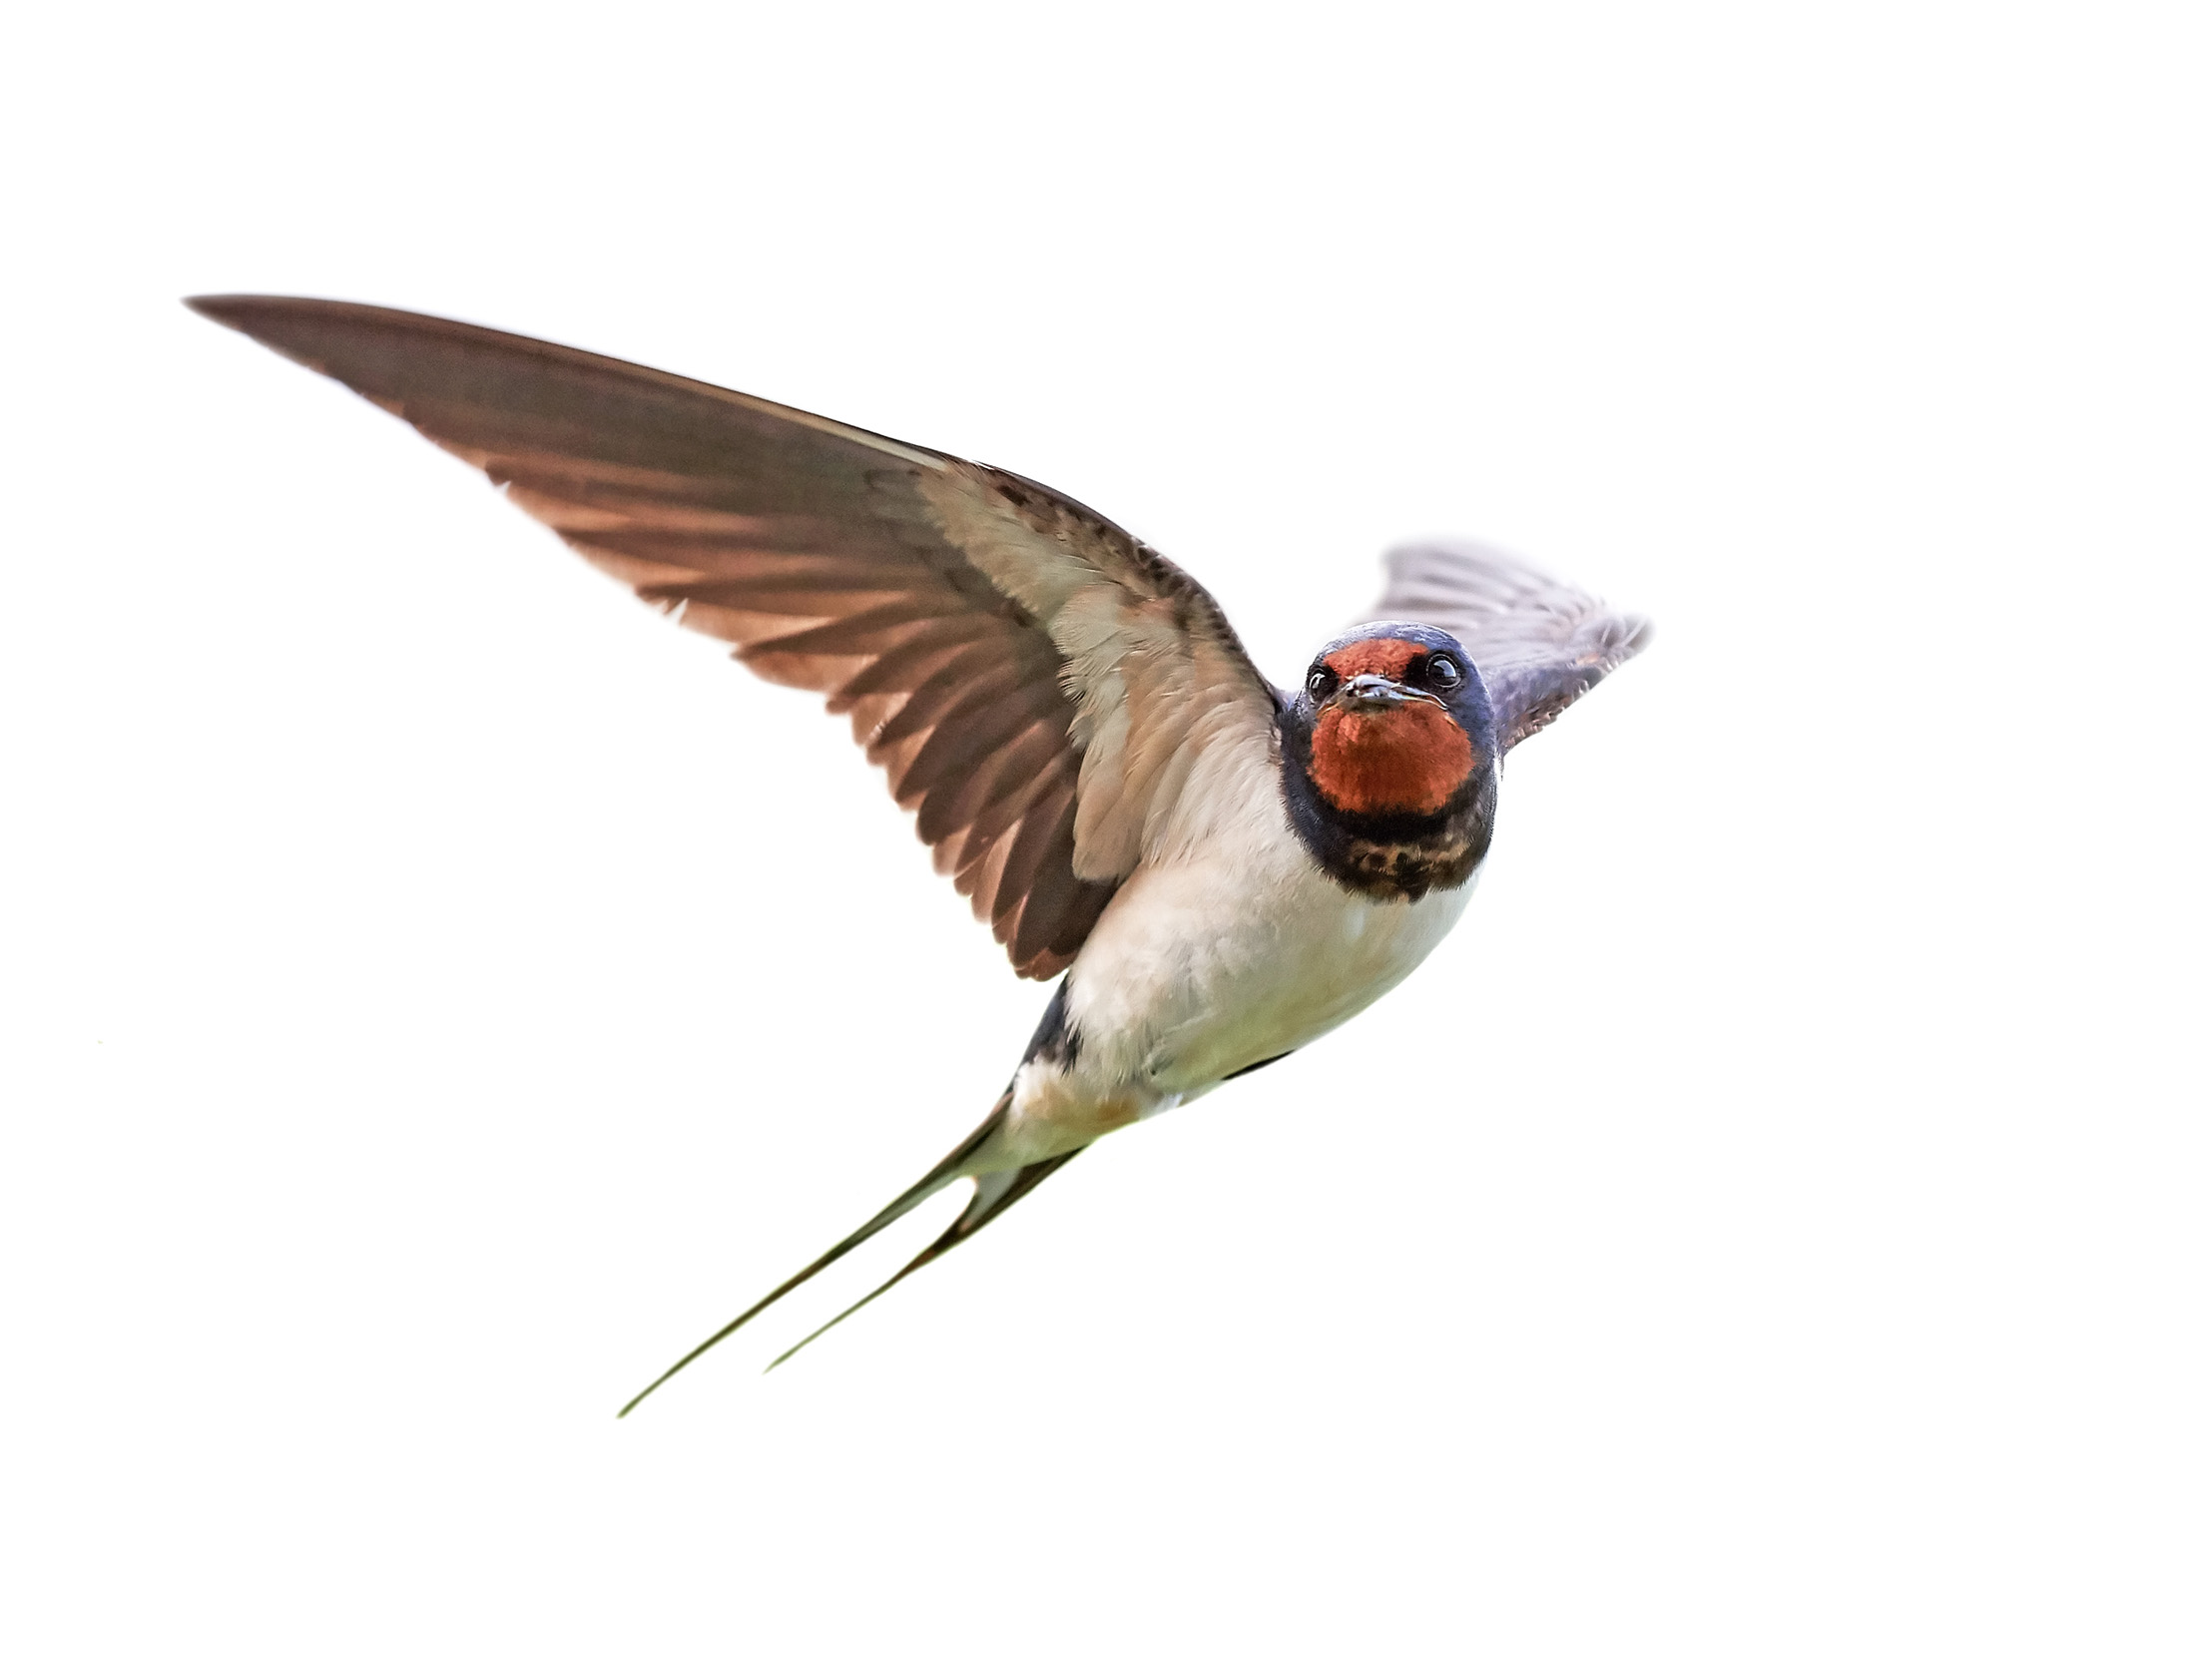 Swallow flying against a white background.